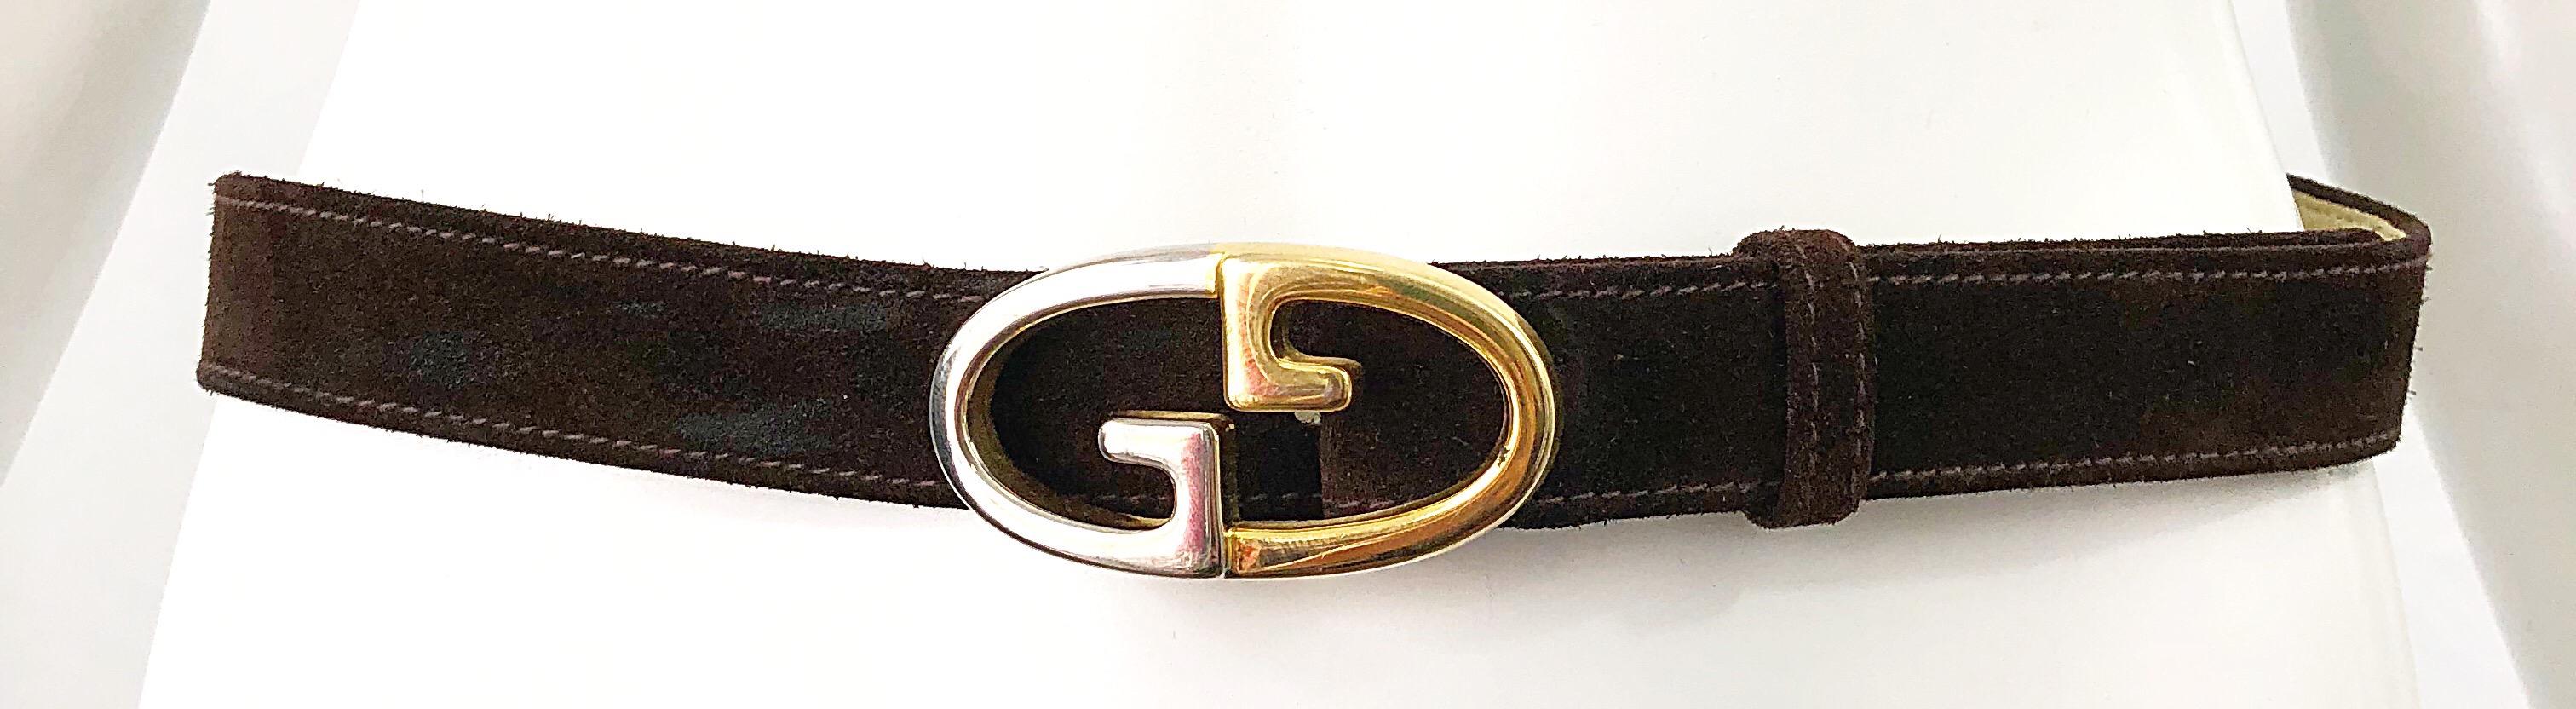 Iconic 1970s GUCCI women's brown suede leather thin belt ! Two tone silver and gold hardware matches anything. Can be paired with jeans, shorts, a skirt, or over a dress.
In great conditon 
Made in Italy
Approximatley Size Small -